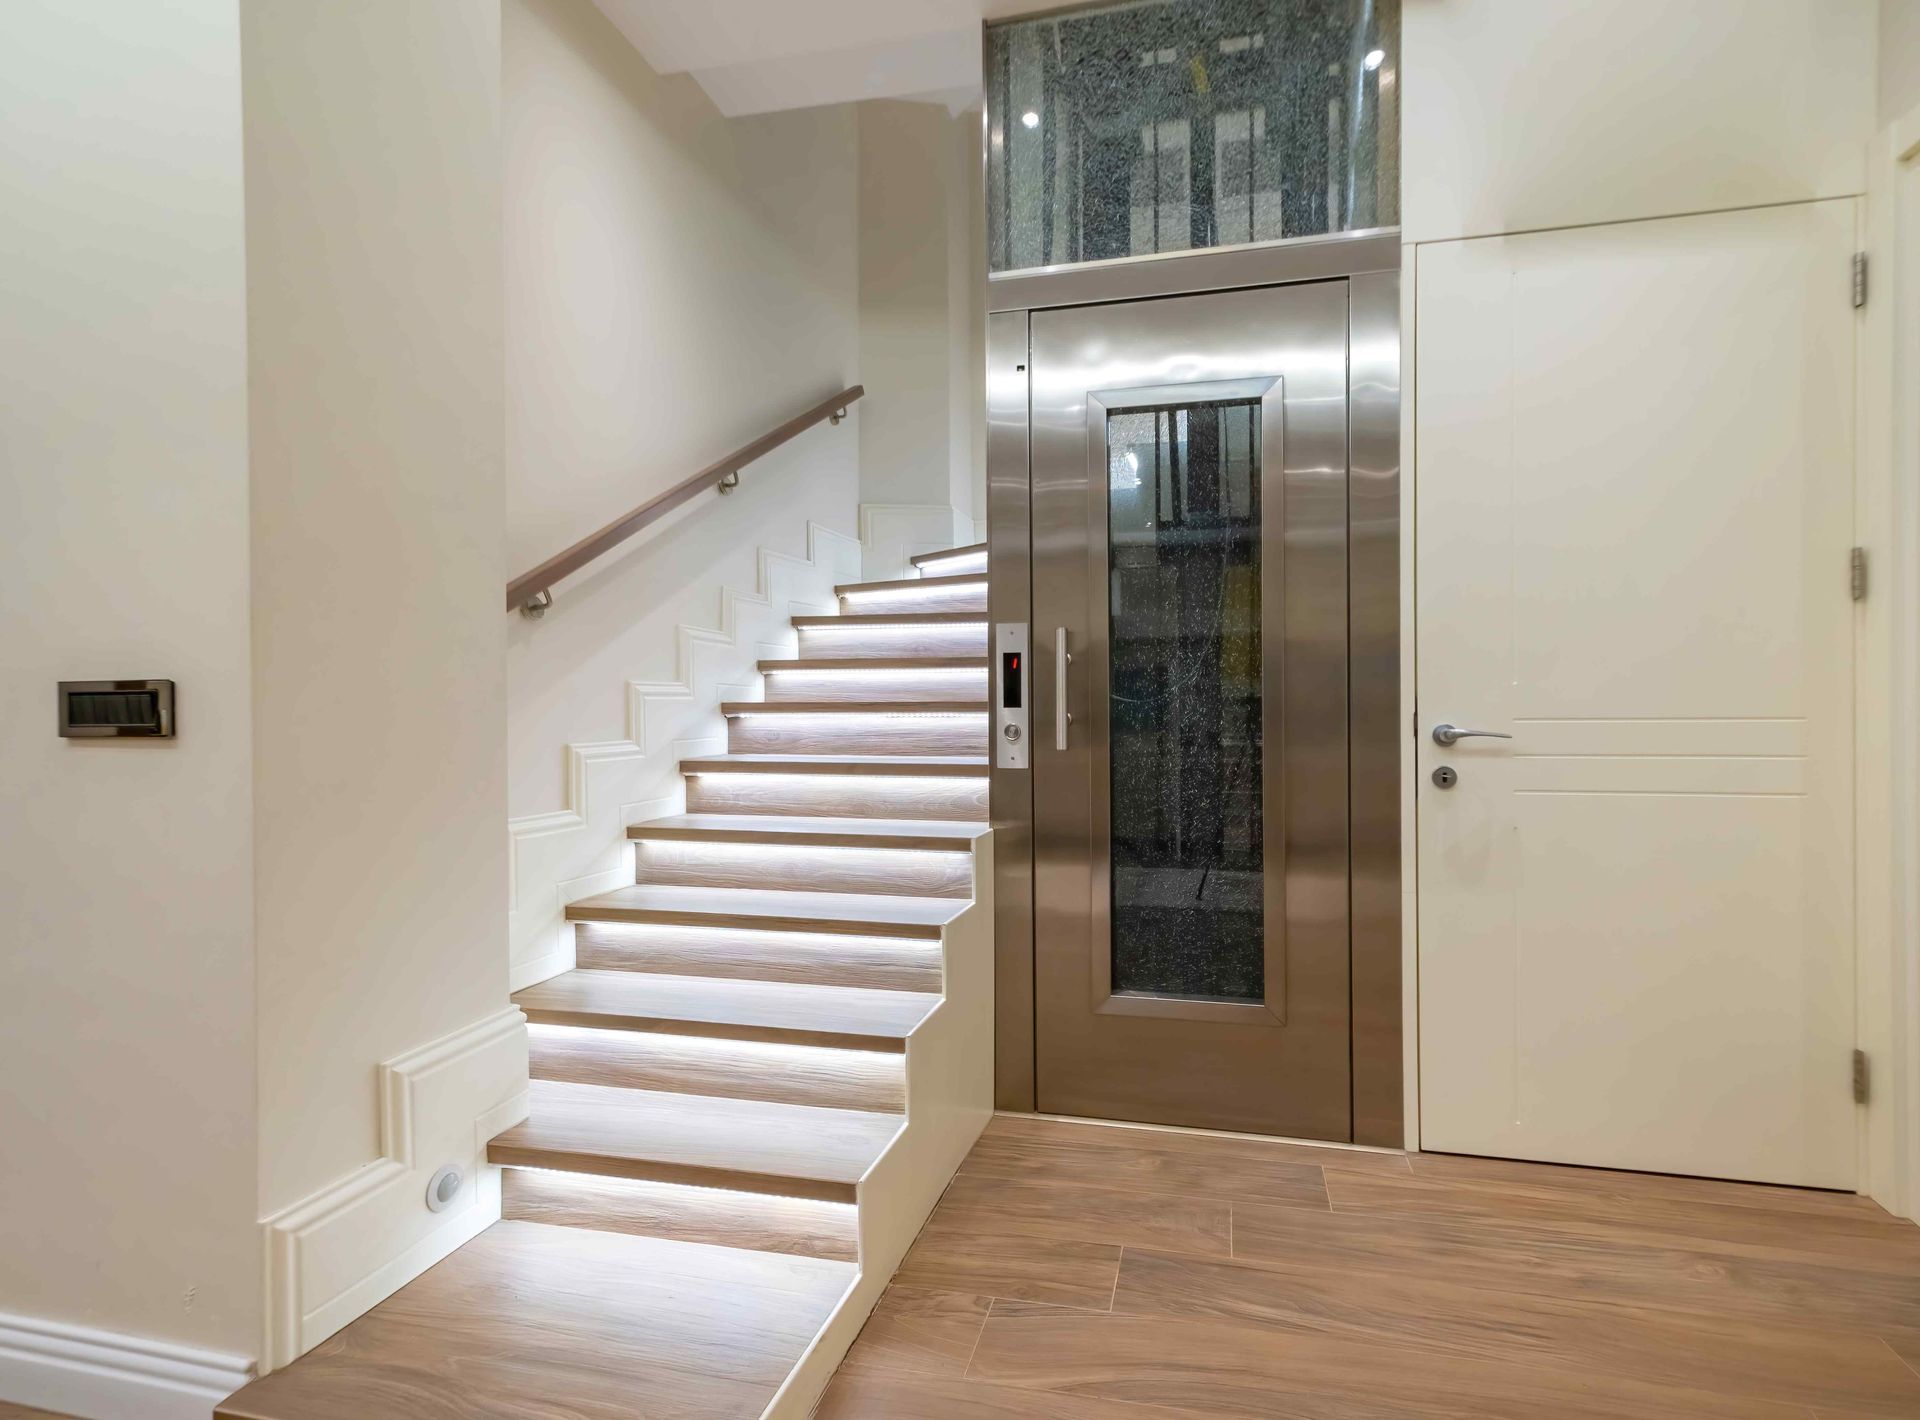 An ultra-modern home is furnished with a stainless steel elevator with a window in the door.